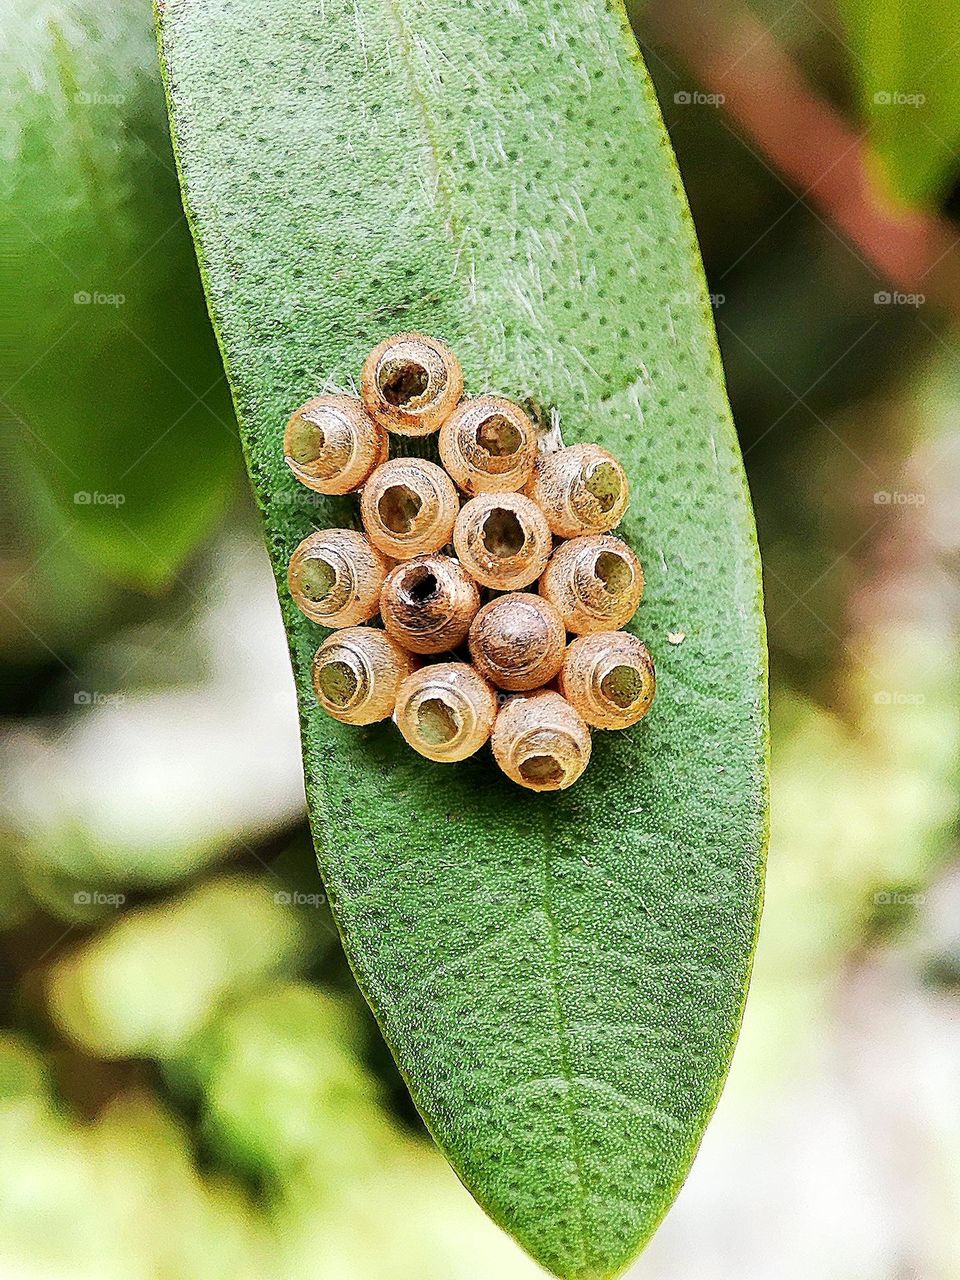 Insects hatched eggs on leaf